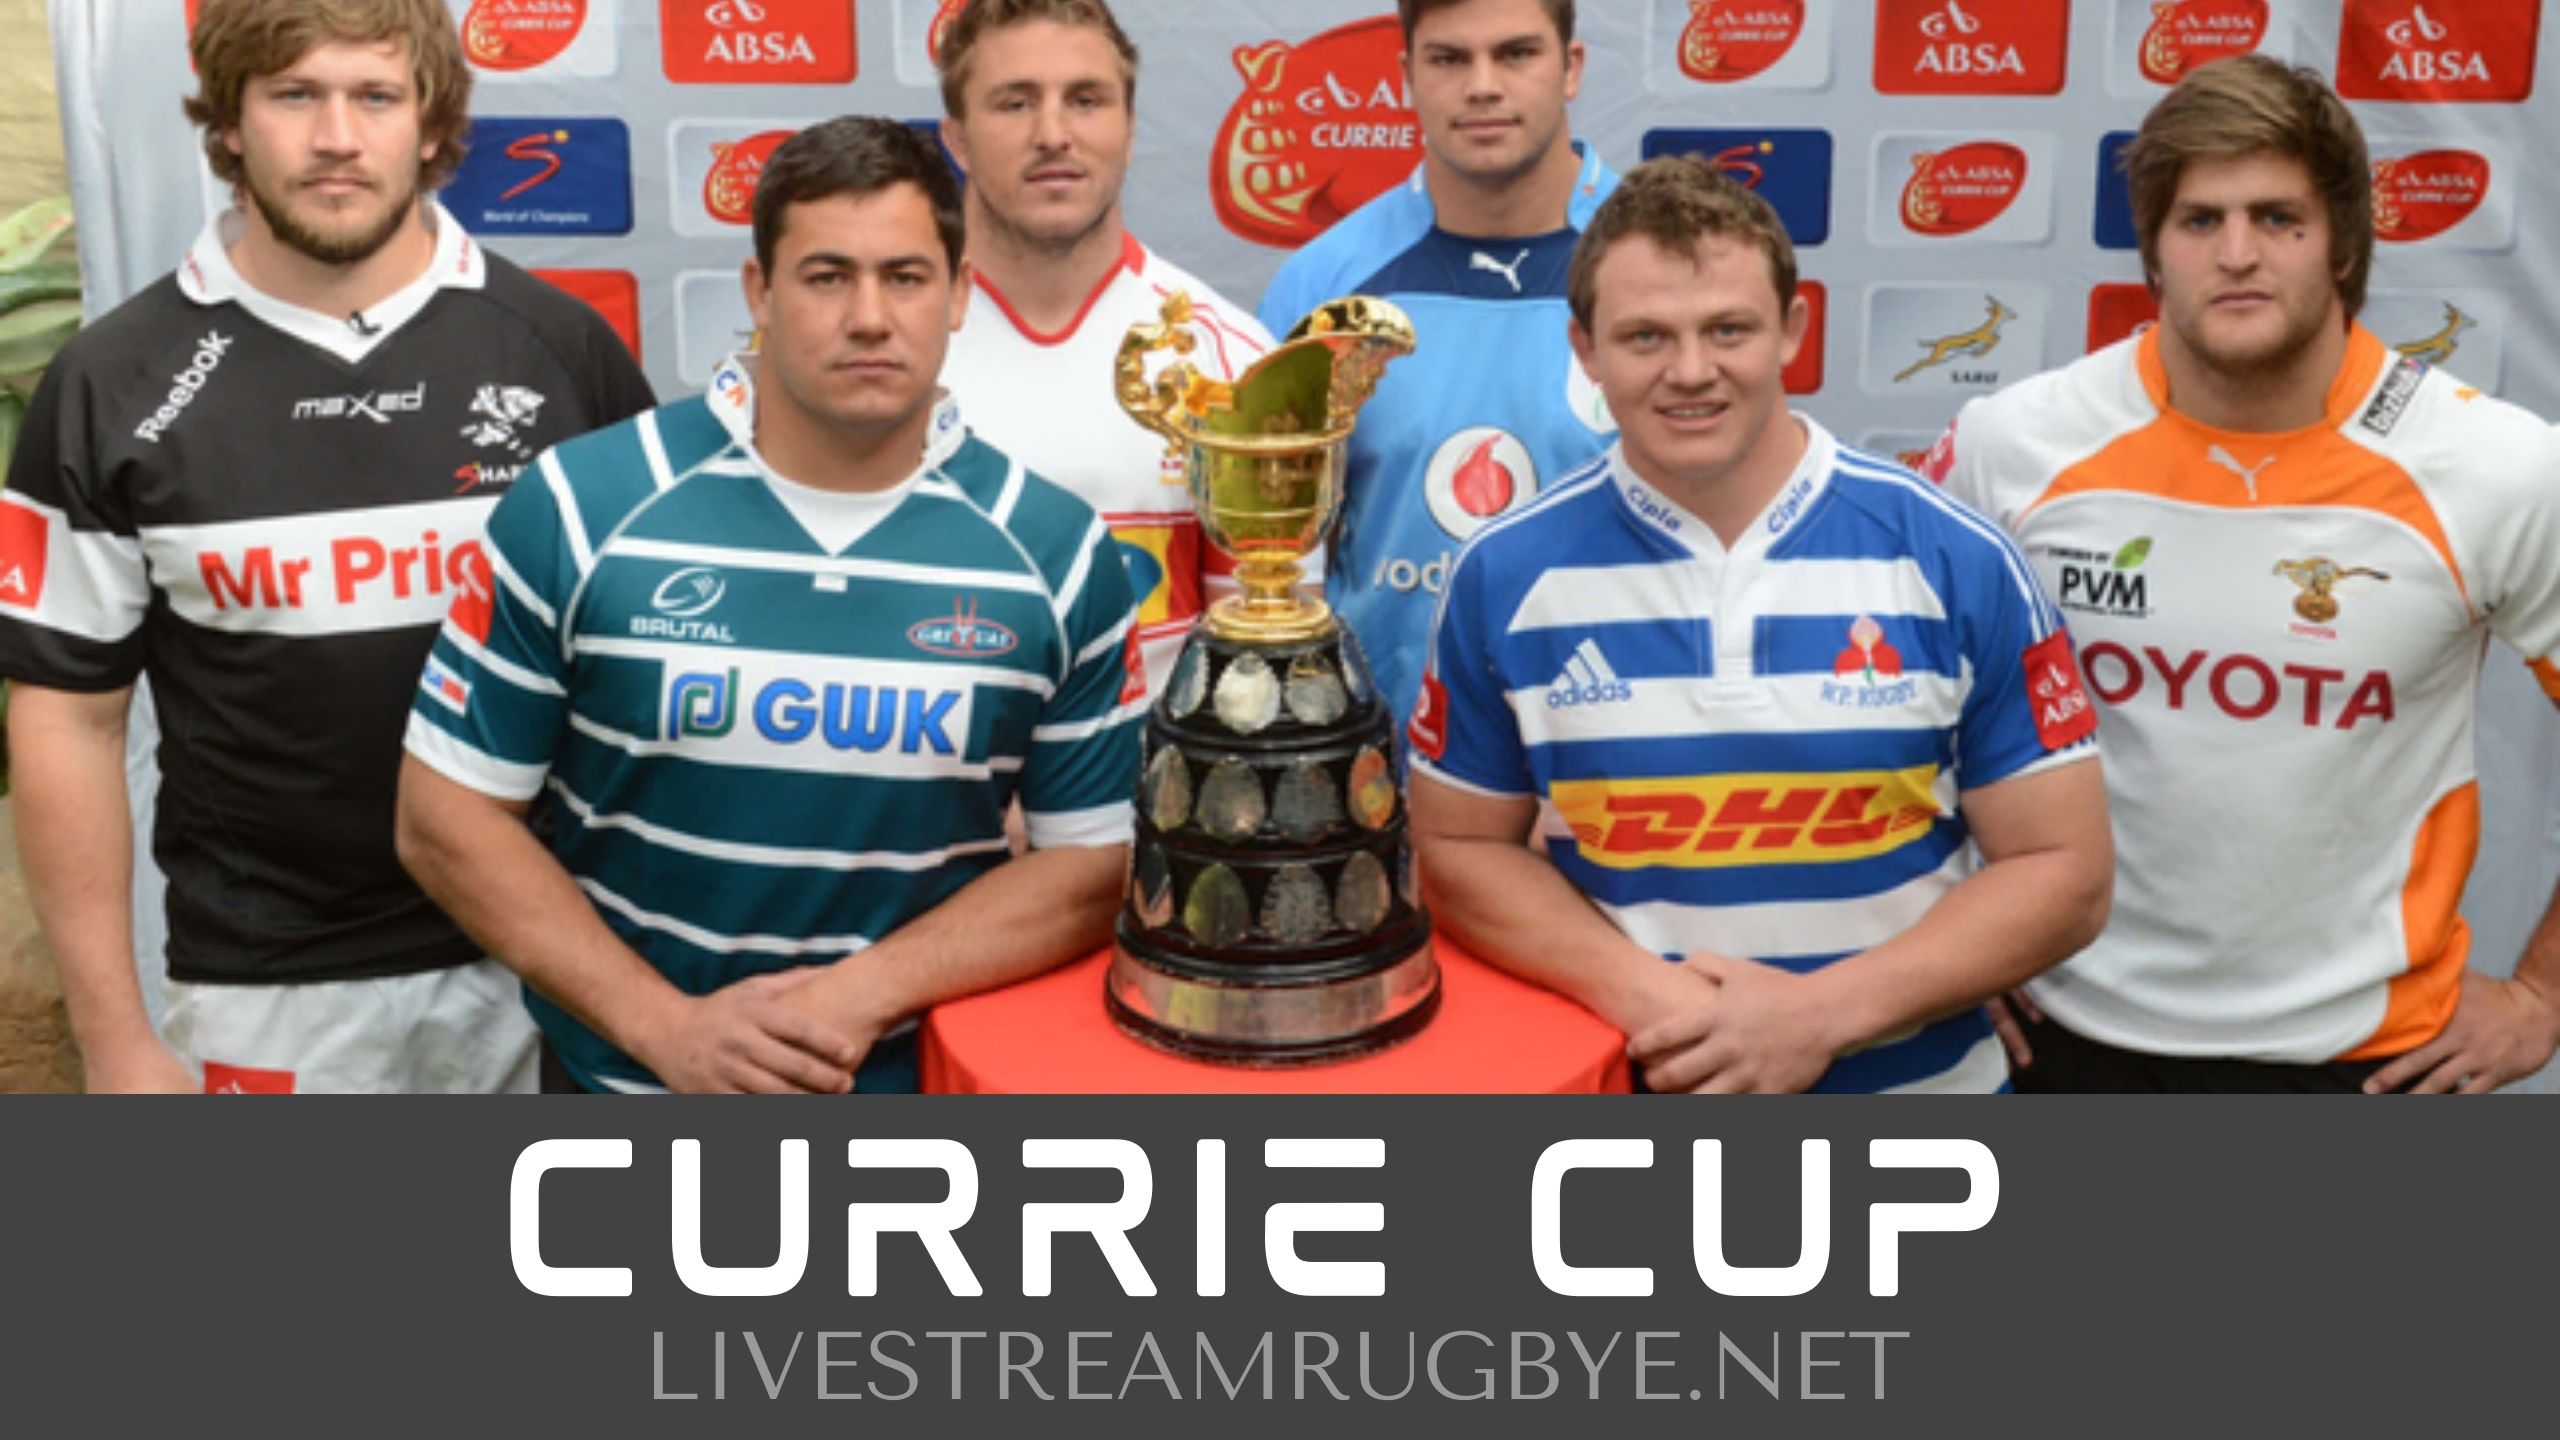 currie cup live stream free